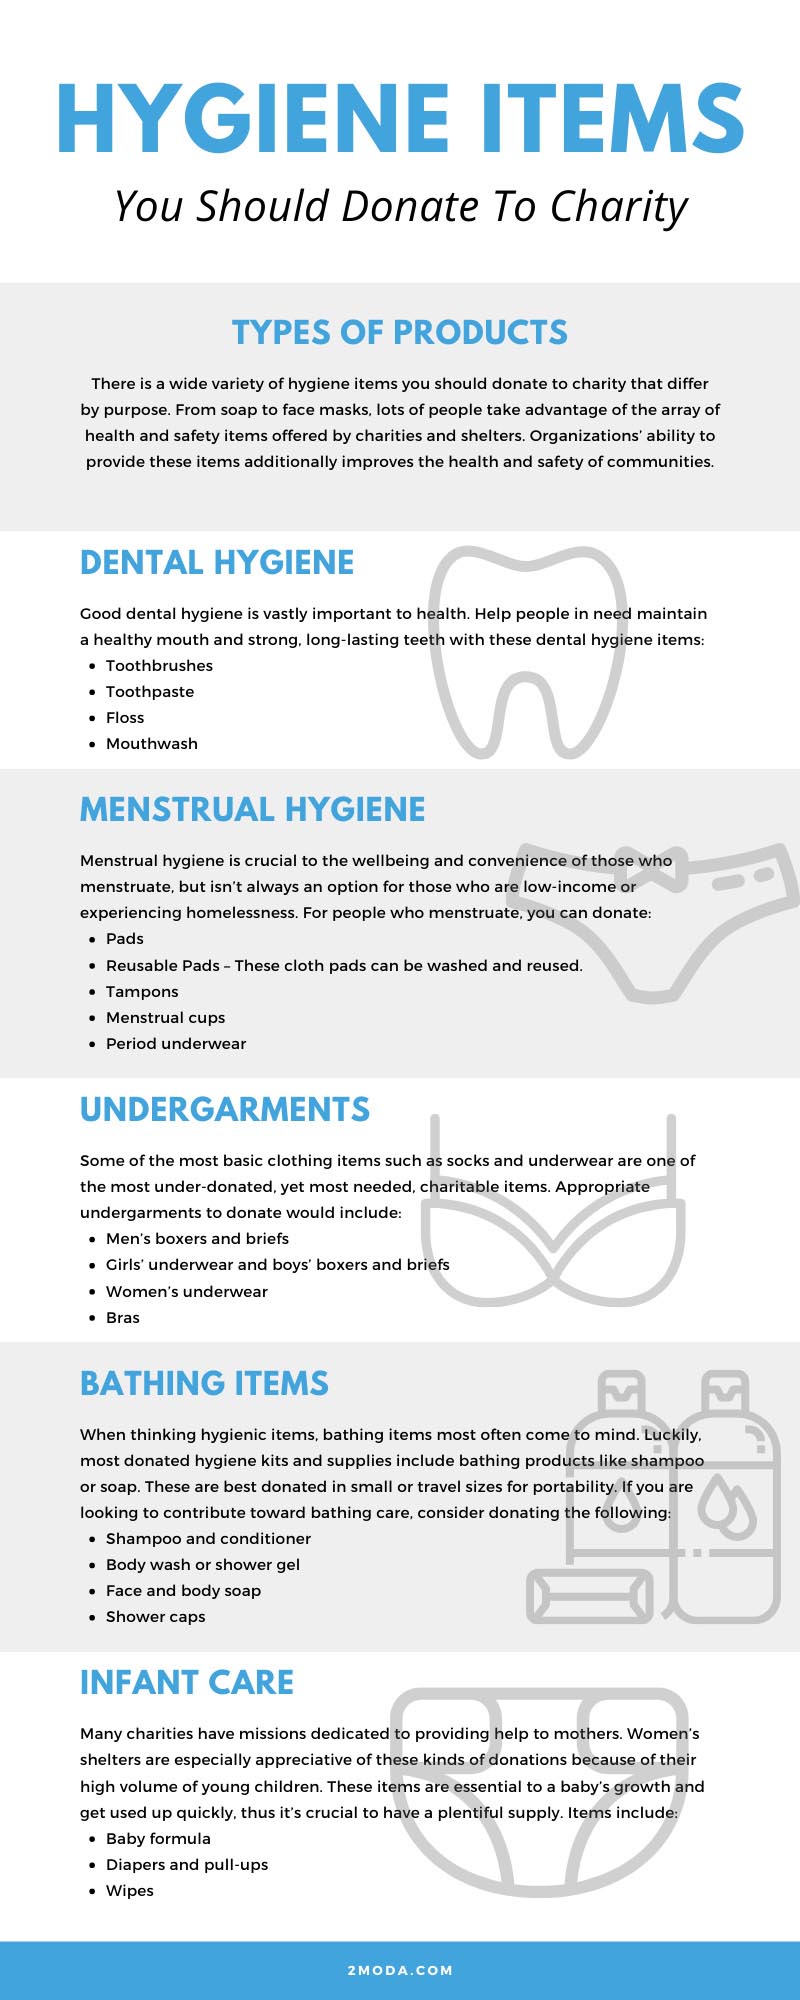 Hygiene Items You Should Donate To Charity